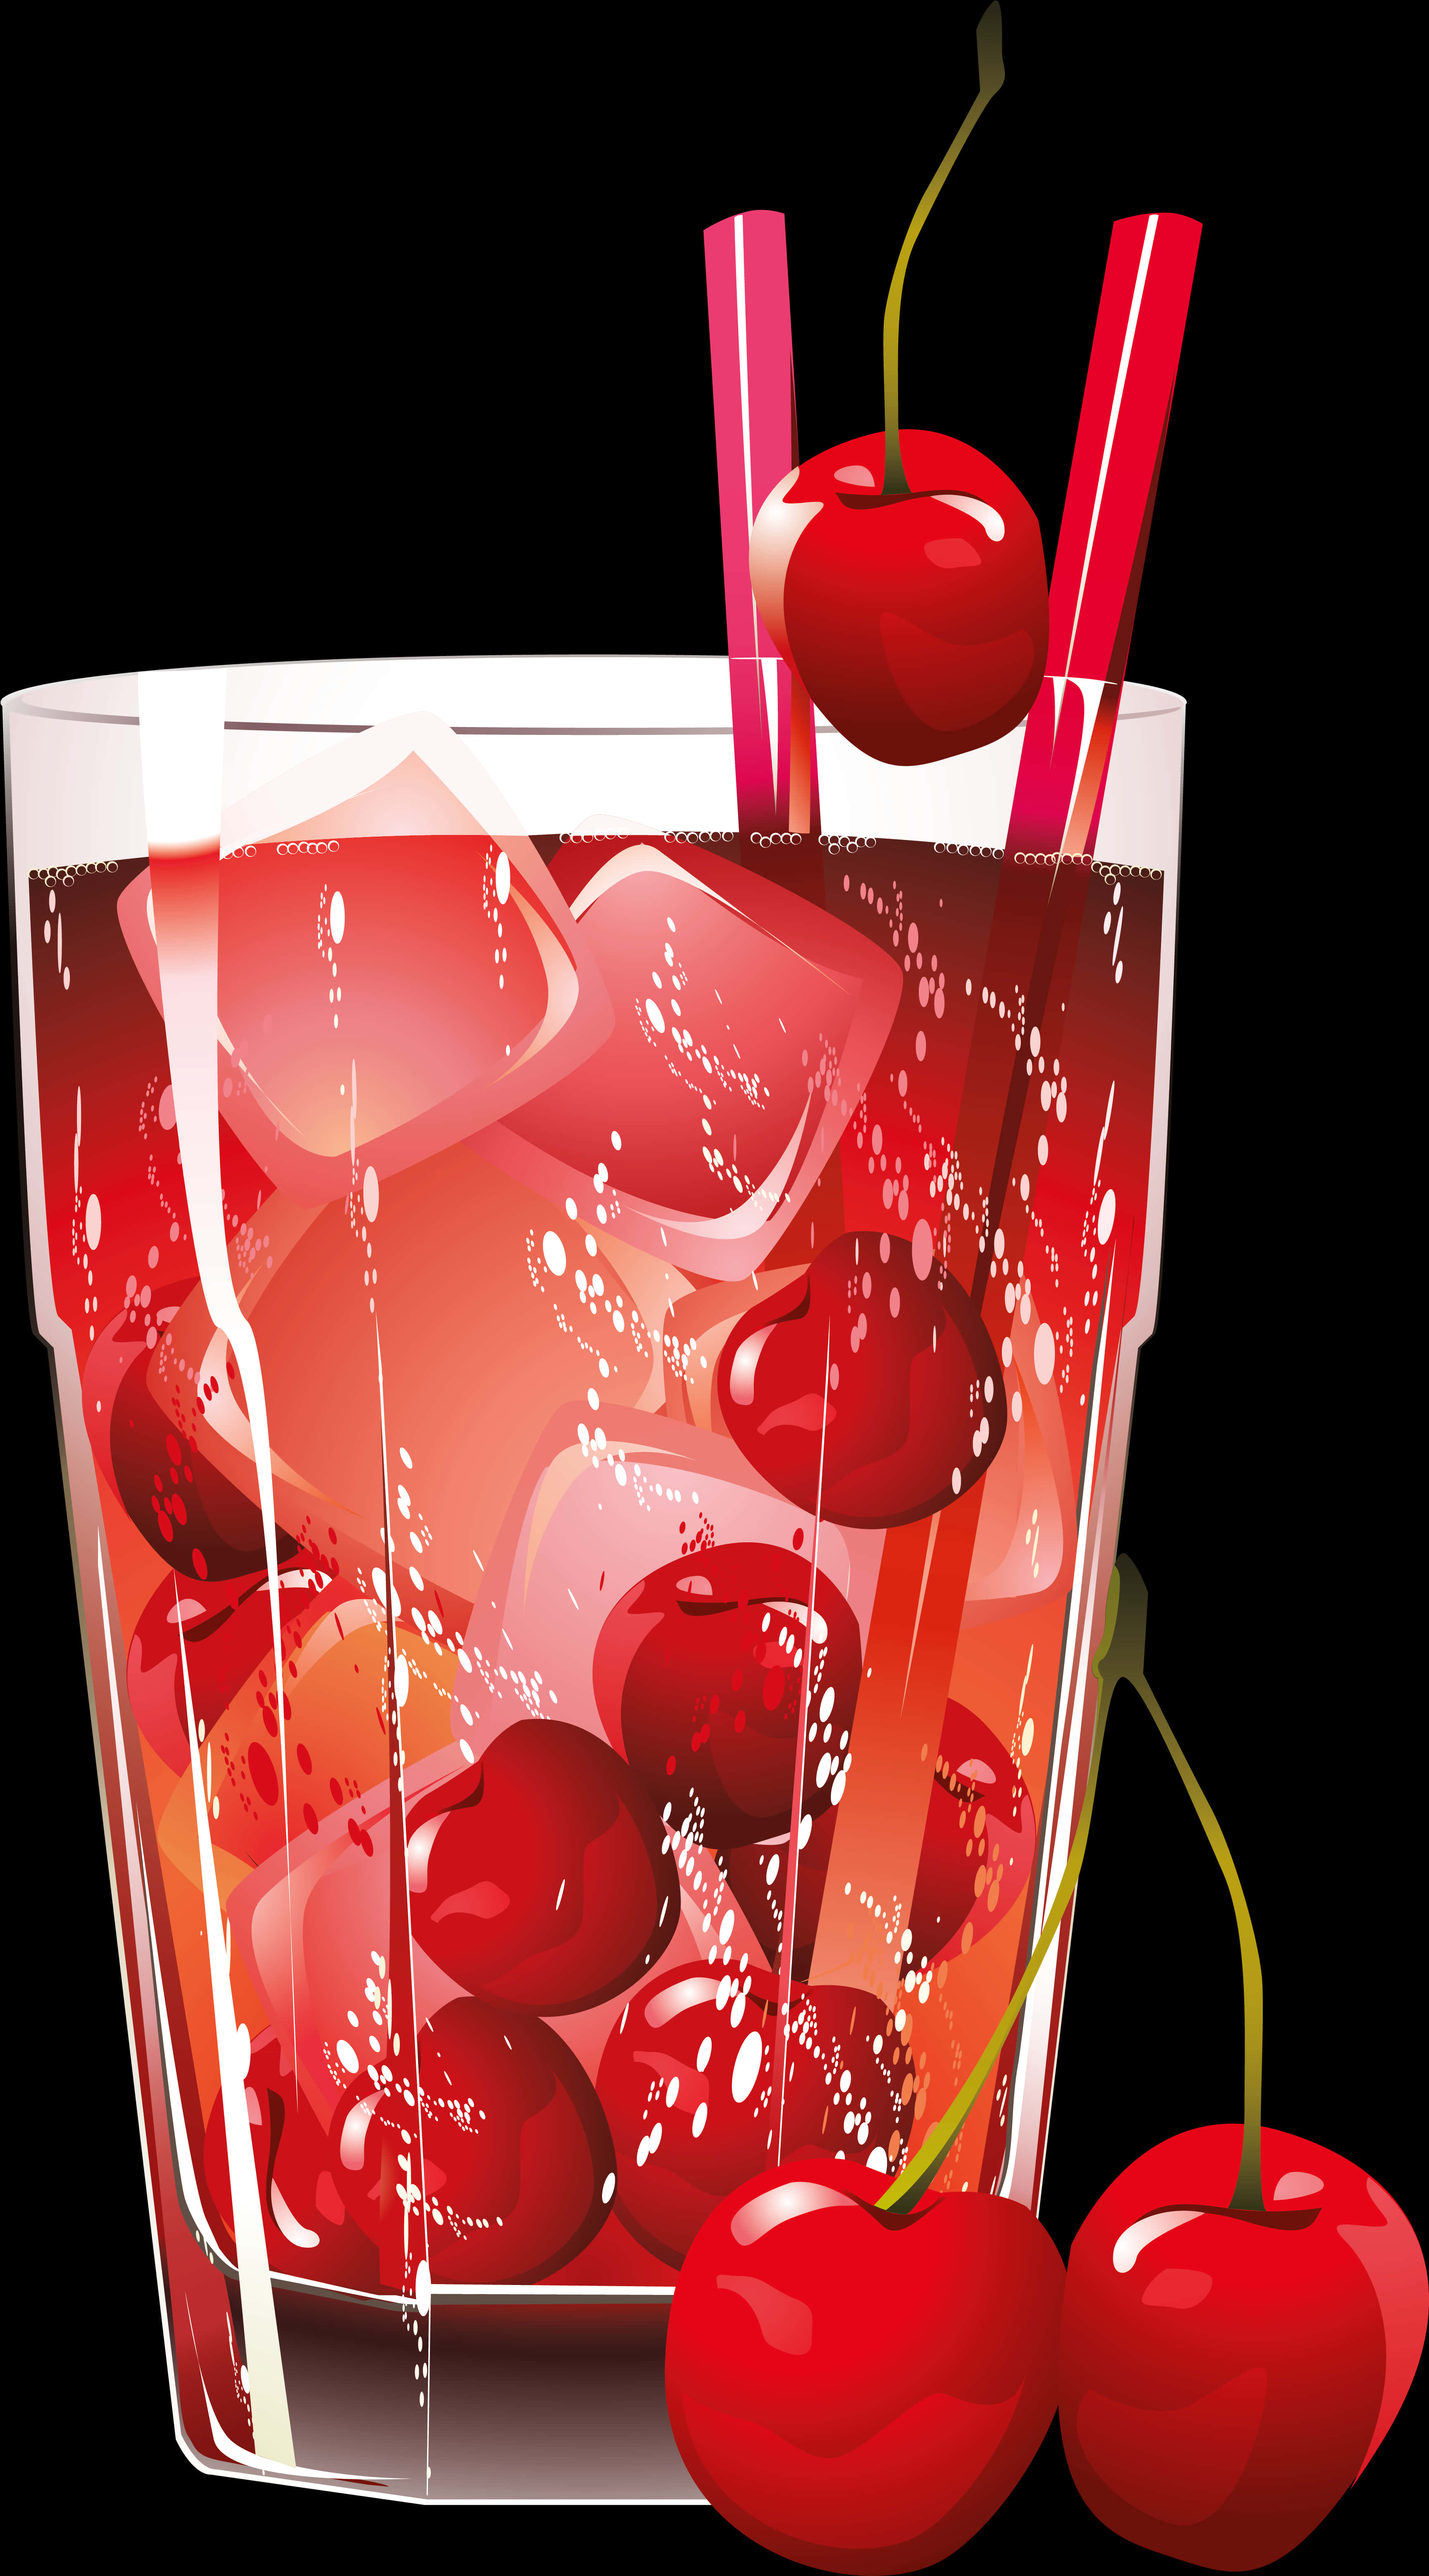 A Glass Of Red Drink With Ice And Cherries